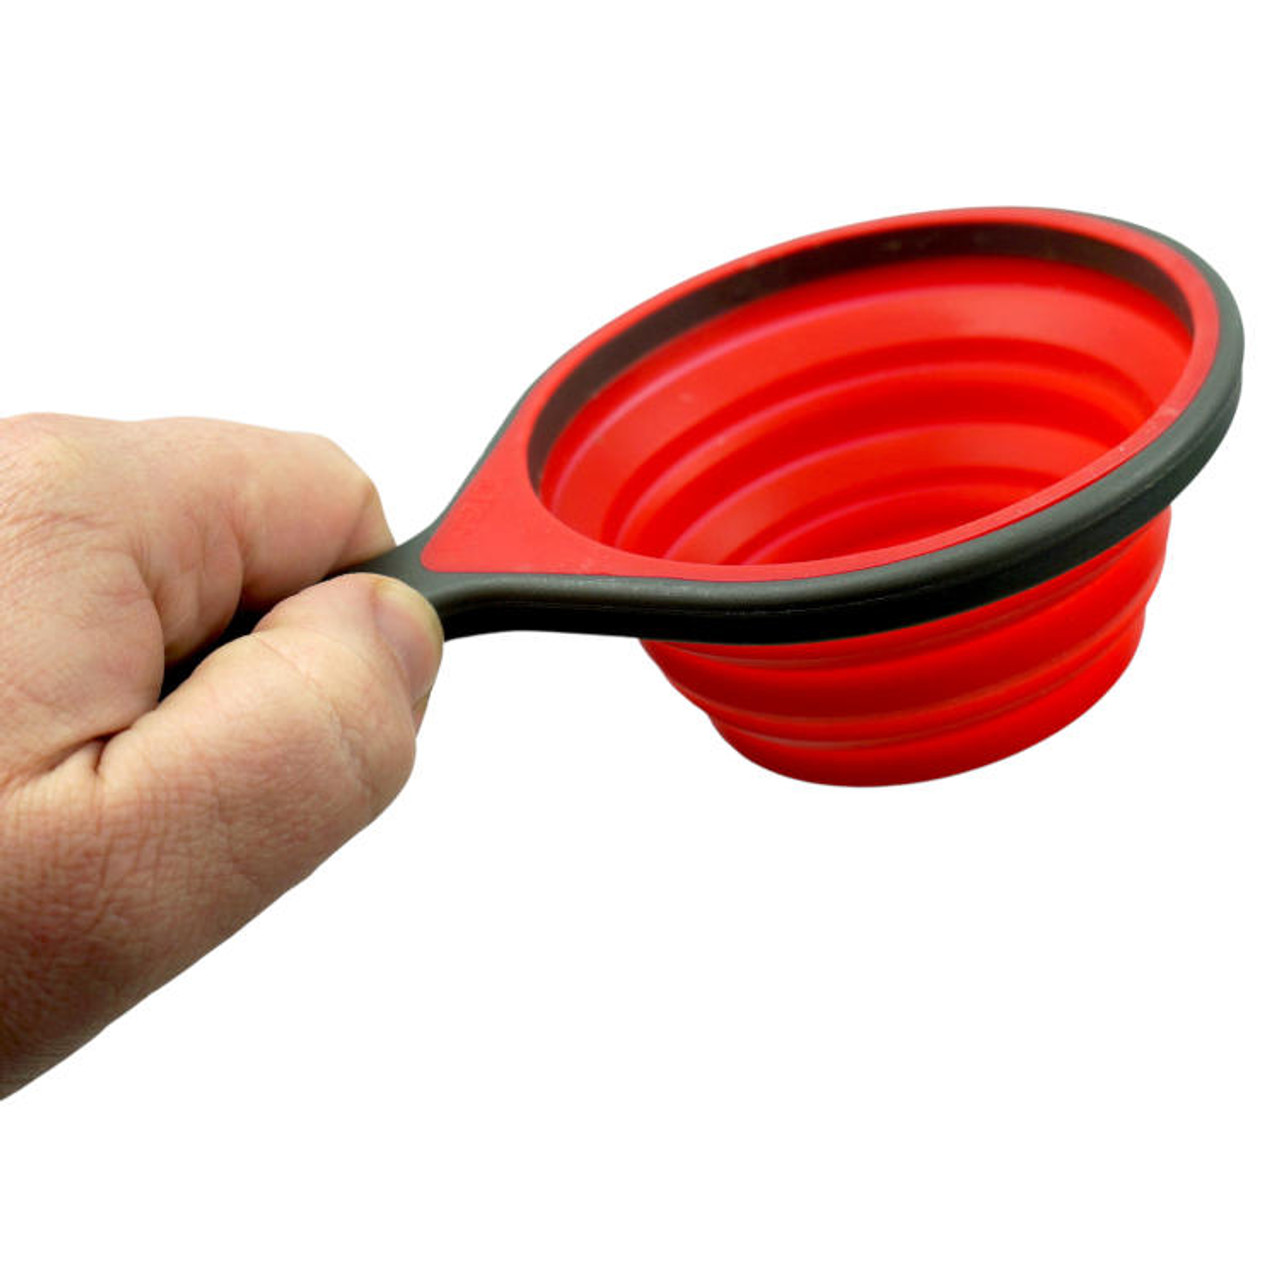 NEW Silicone Collapsible Measuring Cups & Measuring Spoons Baking